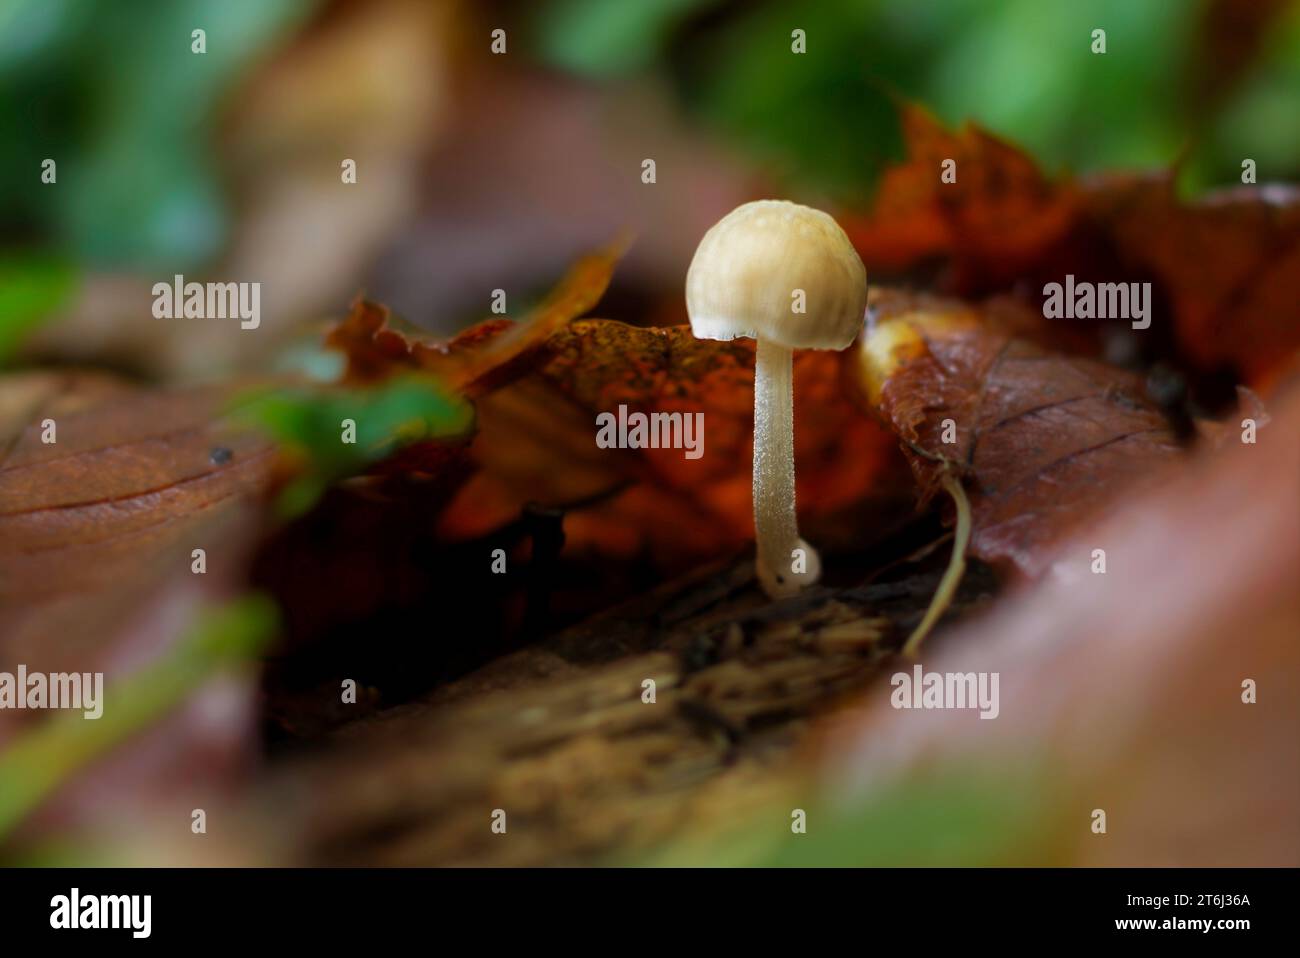 A small white, pleated pluteus mushroom poking out from the leaf litter. Stock Photo